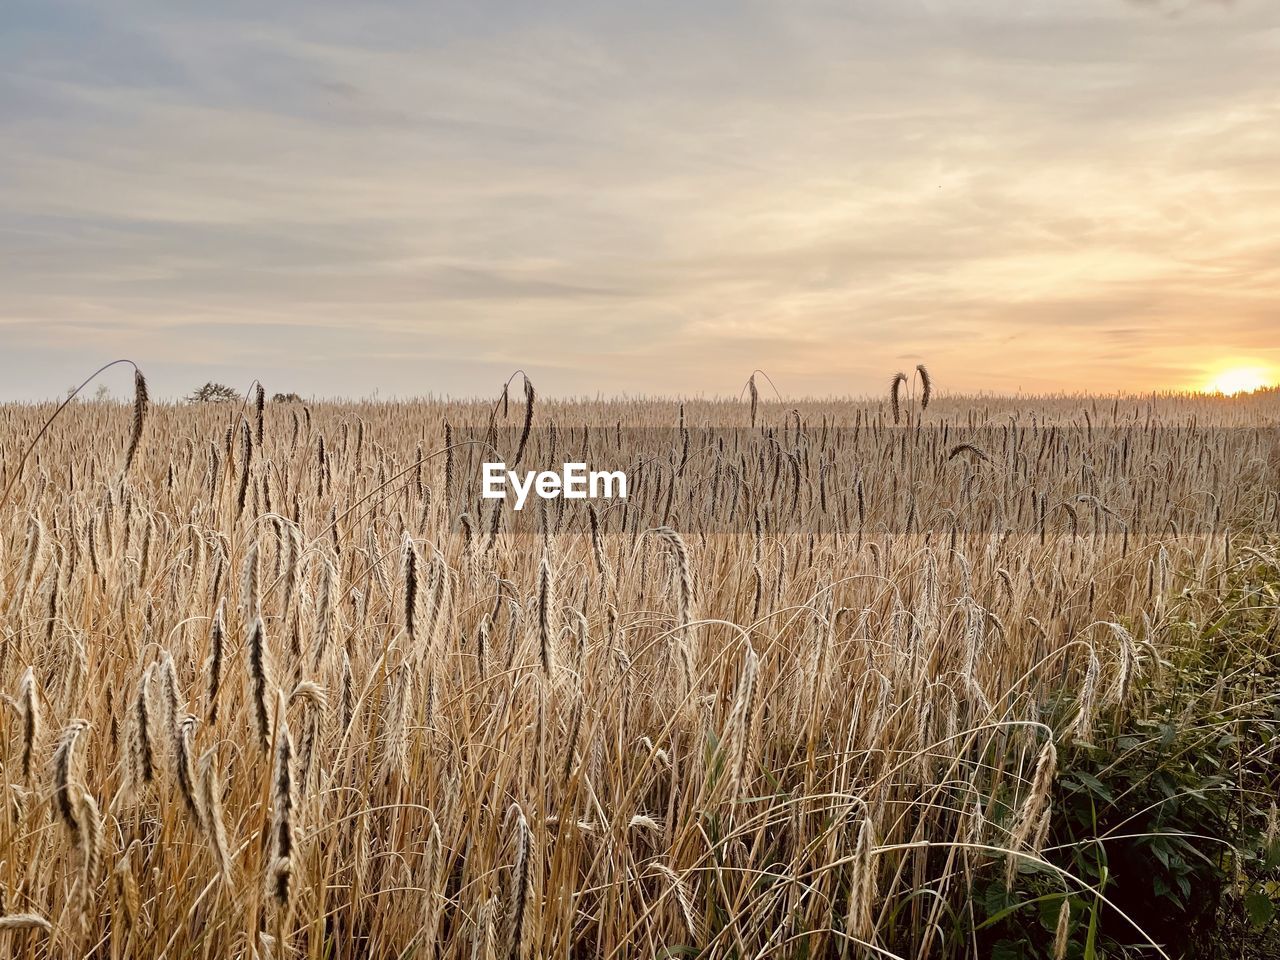 VIEW OF STALKS IN FIELD AGAINST SUNSET SKY